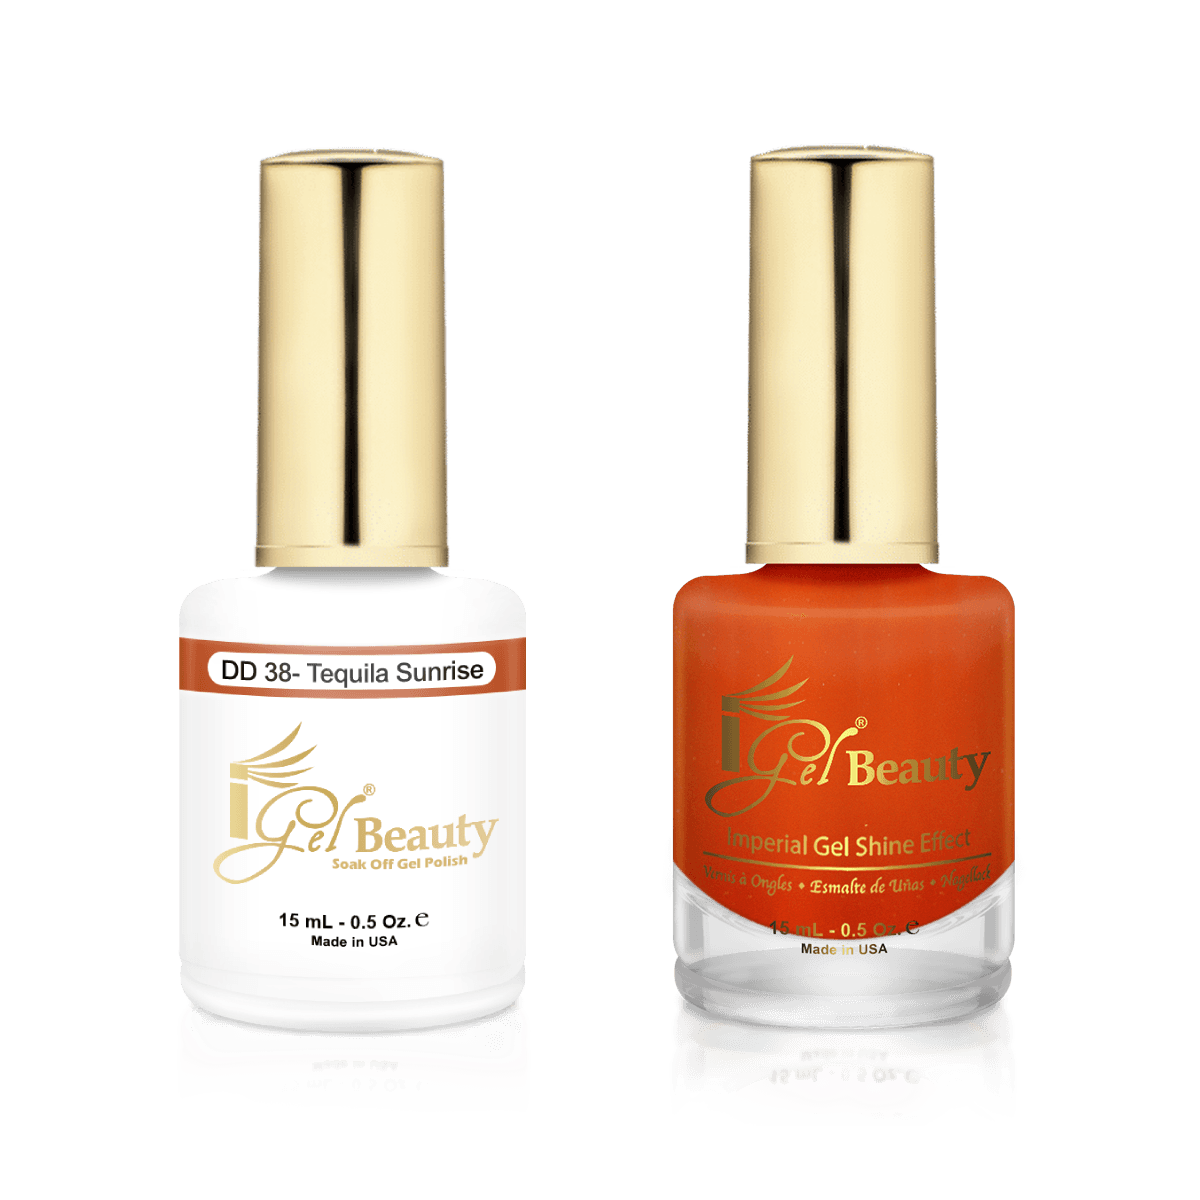 IGel Duo Gel Polish + Matching Nail Lacquer DD 38 TEQUILA SUNRISE